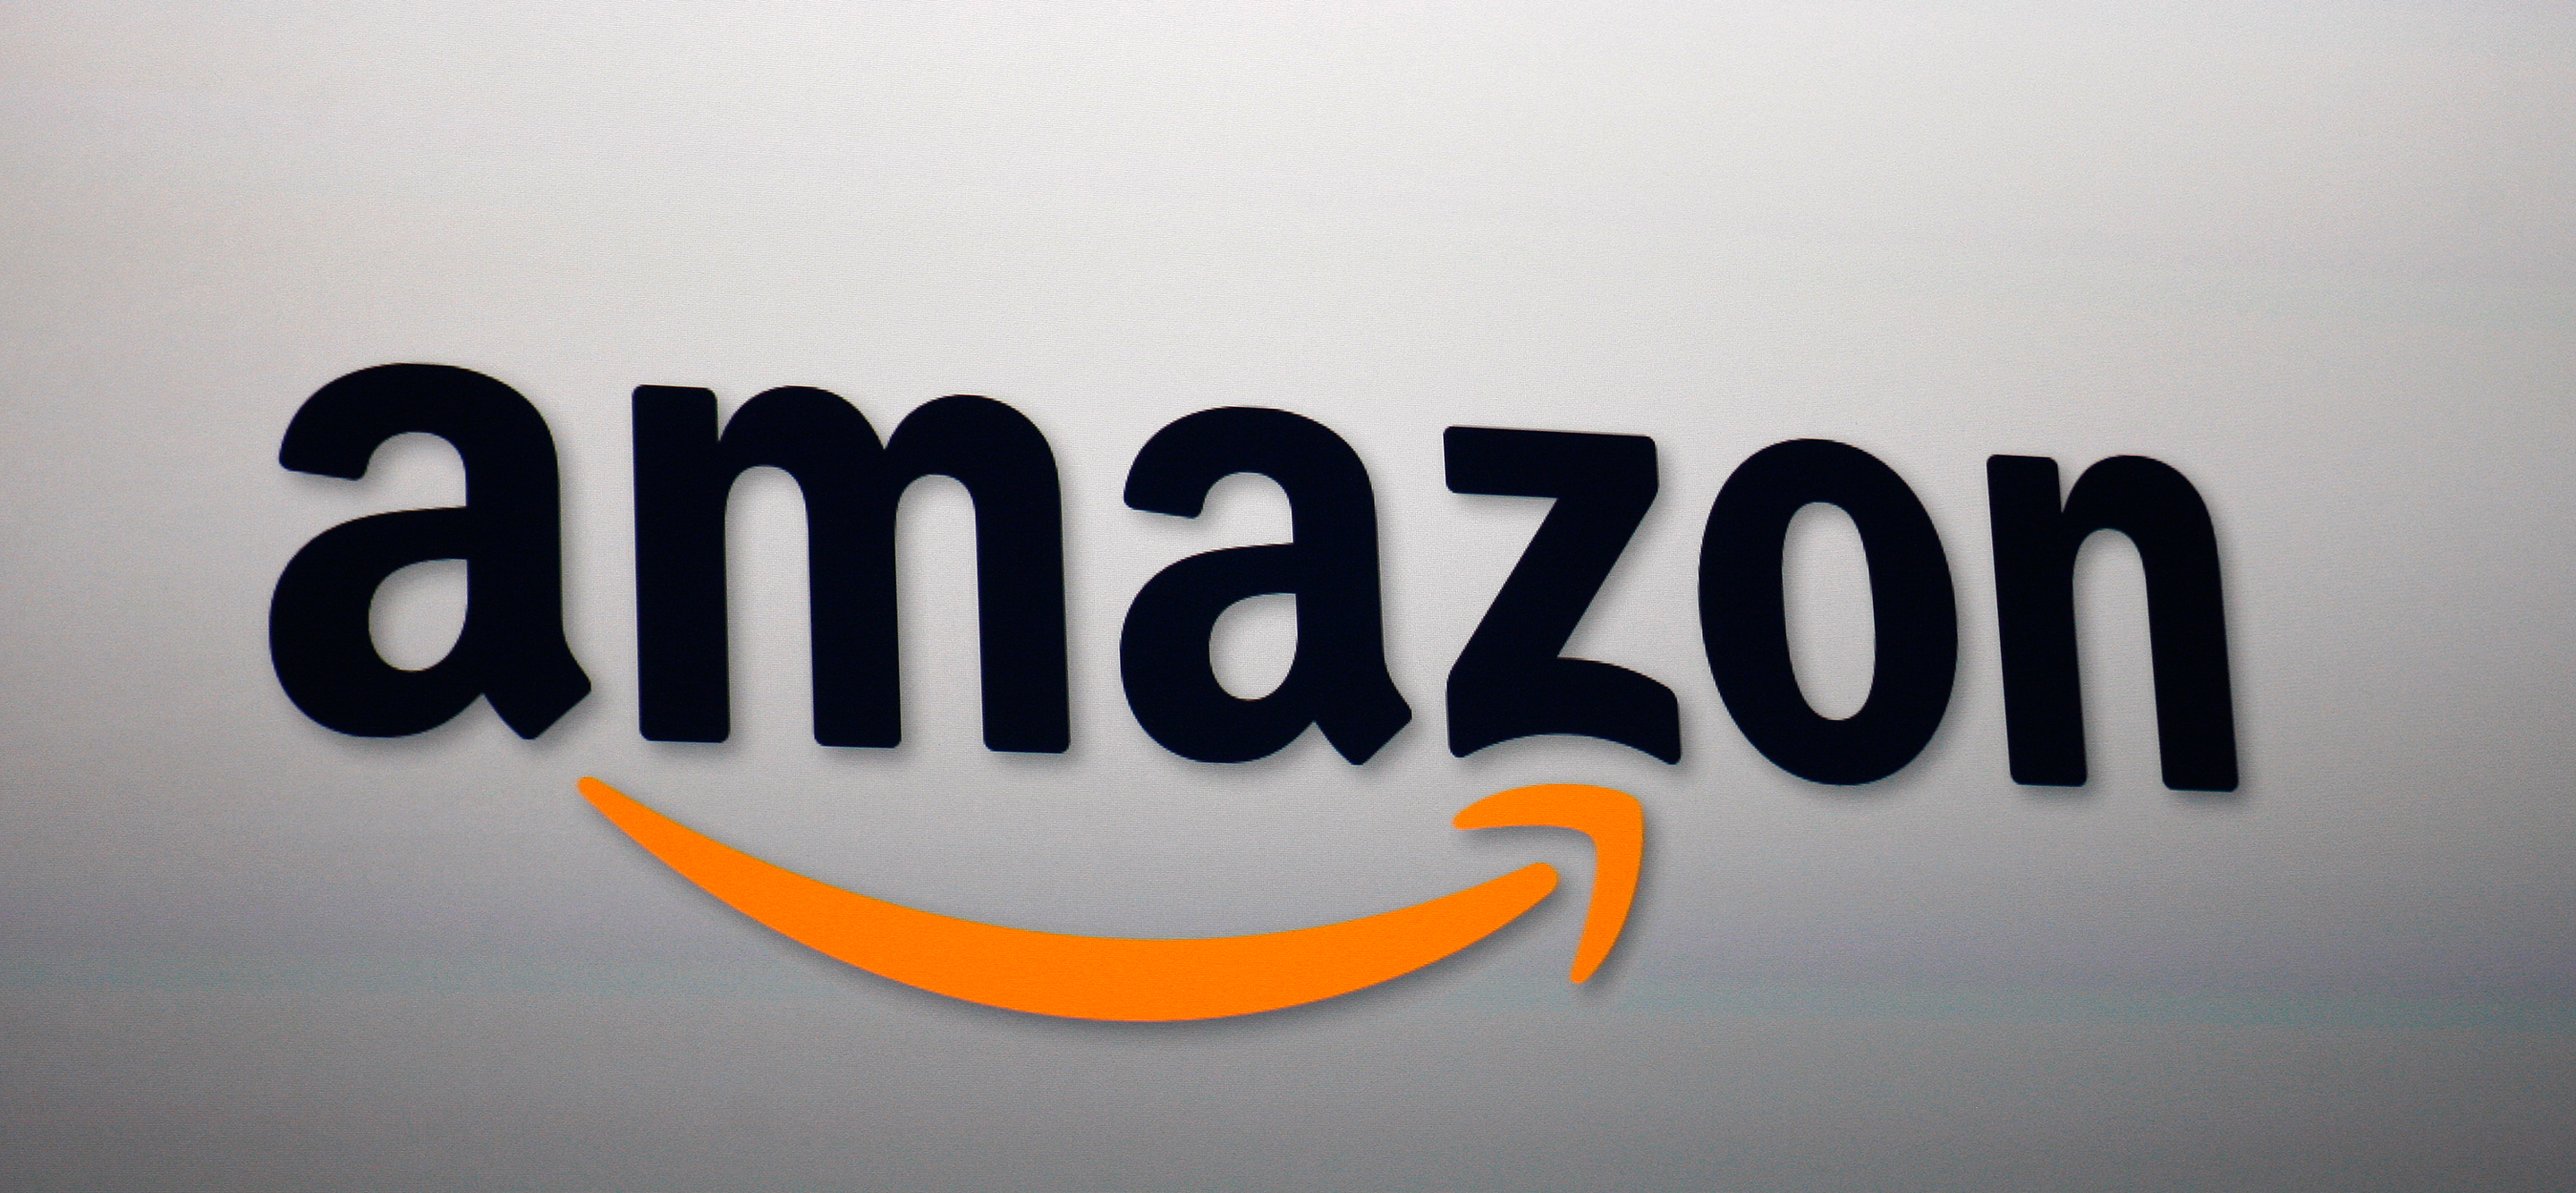 Amazon’s music streaming services launch “within weeks”?